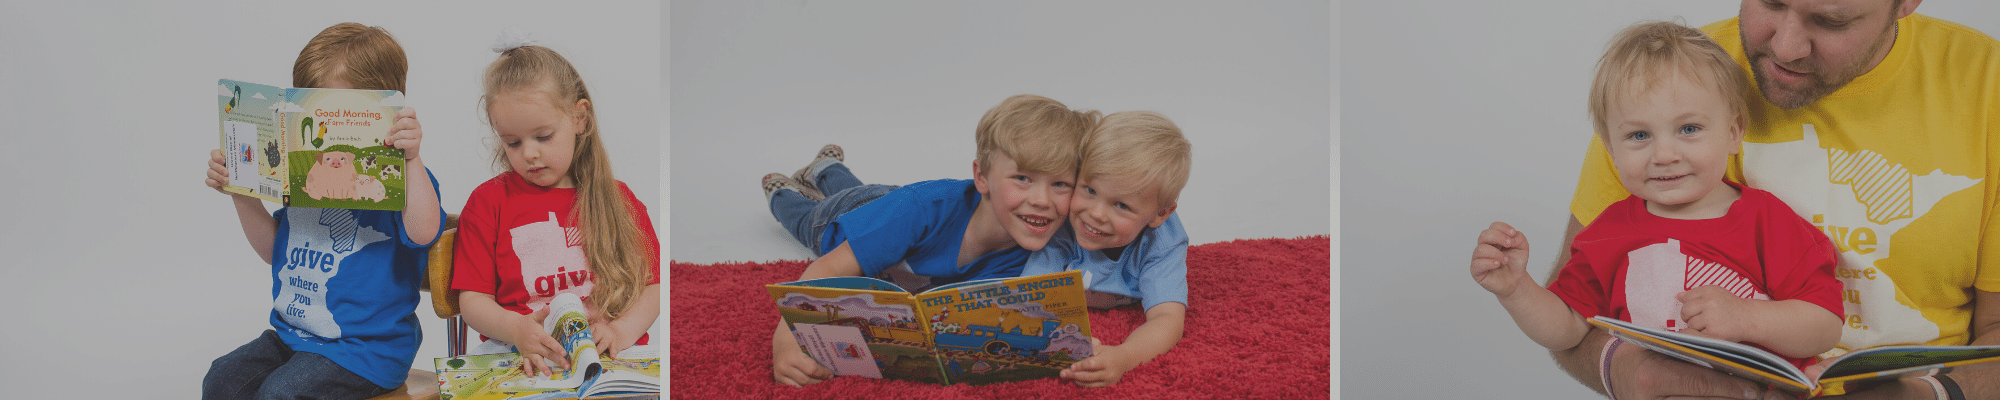 Children with Imagination Library books